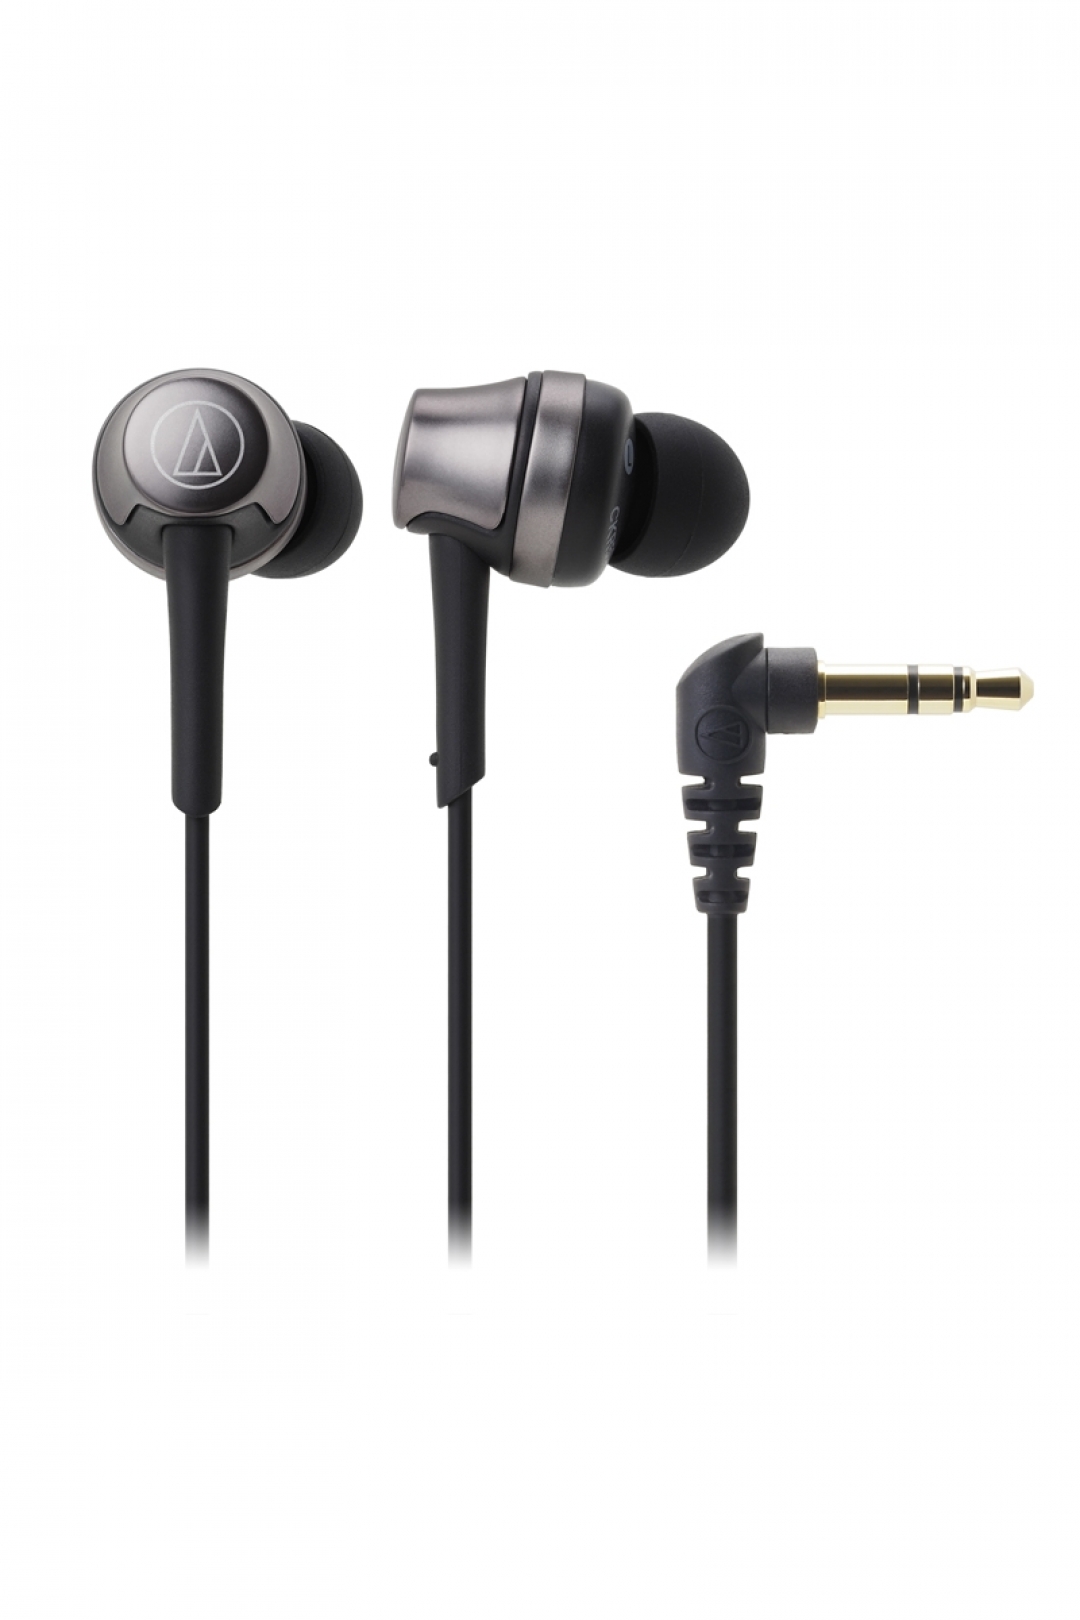 Tai nghe Audio Technica ATH-CKR50iS